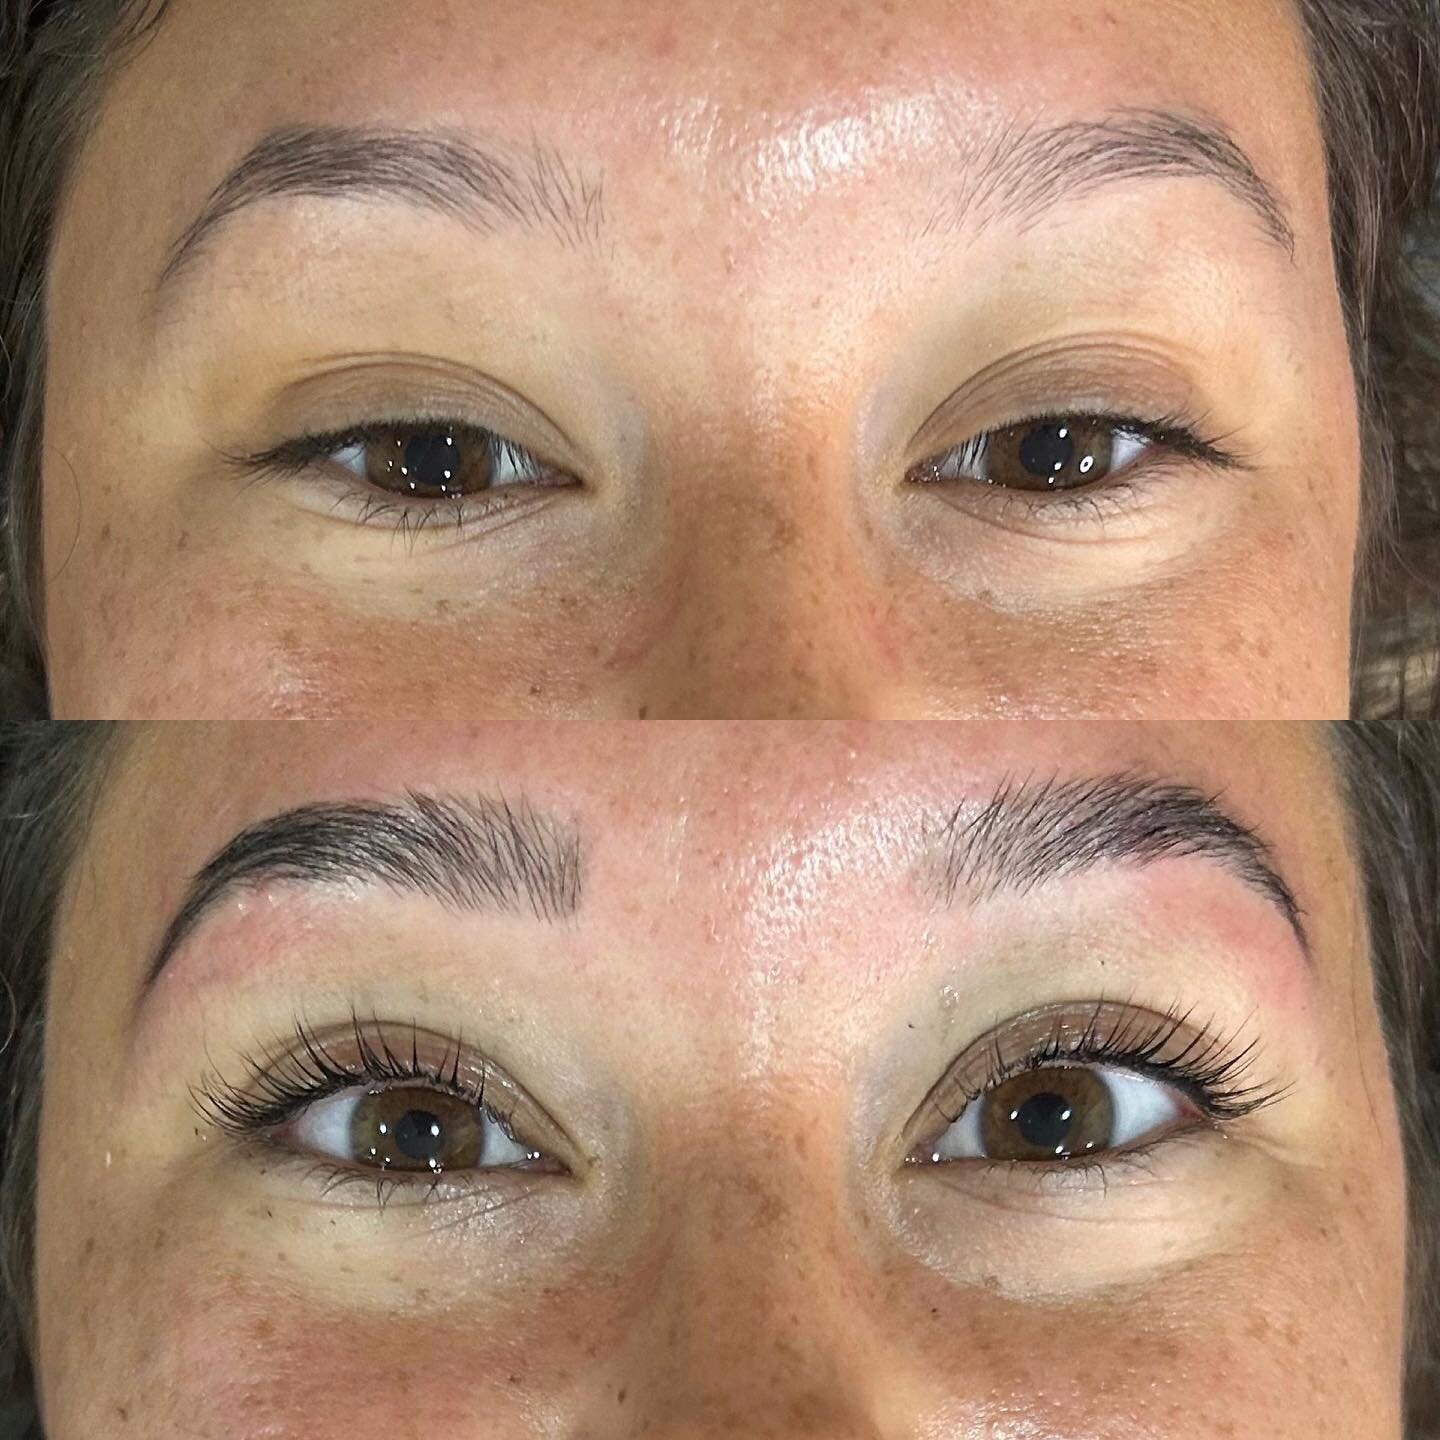 August promo lash lift and brown lamination 20% when you book at the same time‼️ my lovely client Ruth looks amazing after her service and she loved her results 😍 book with me today 🫶🏽 #browlamination #browlamandlashlift #lashlift #lashliftandtint